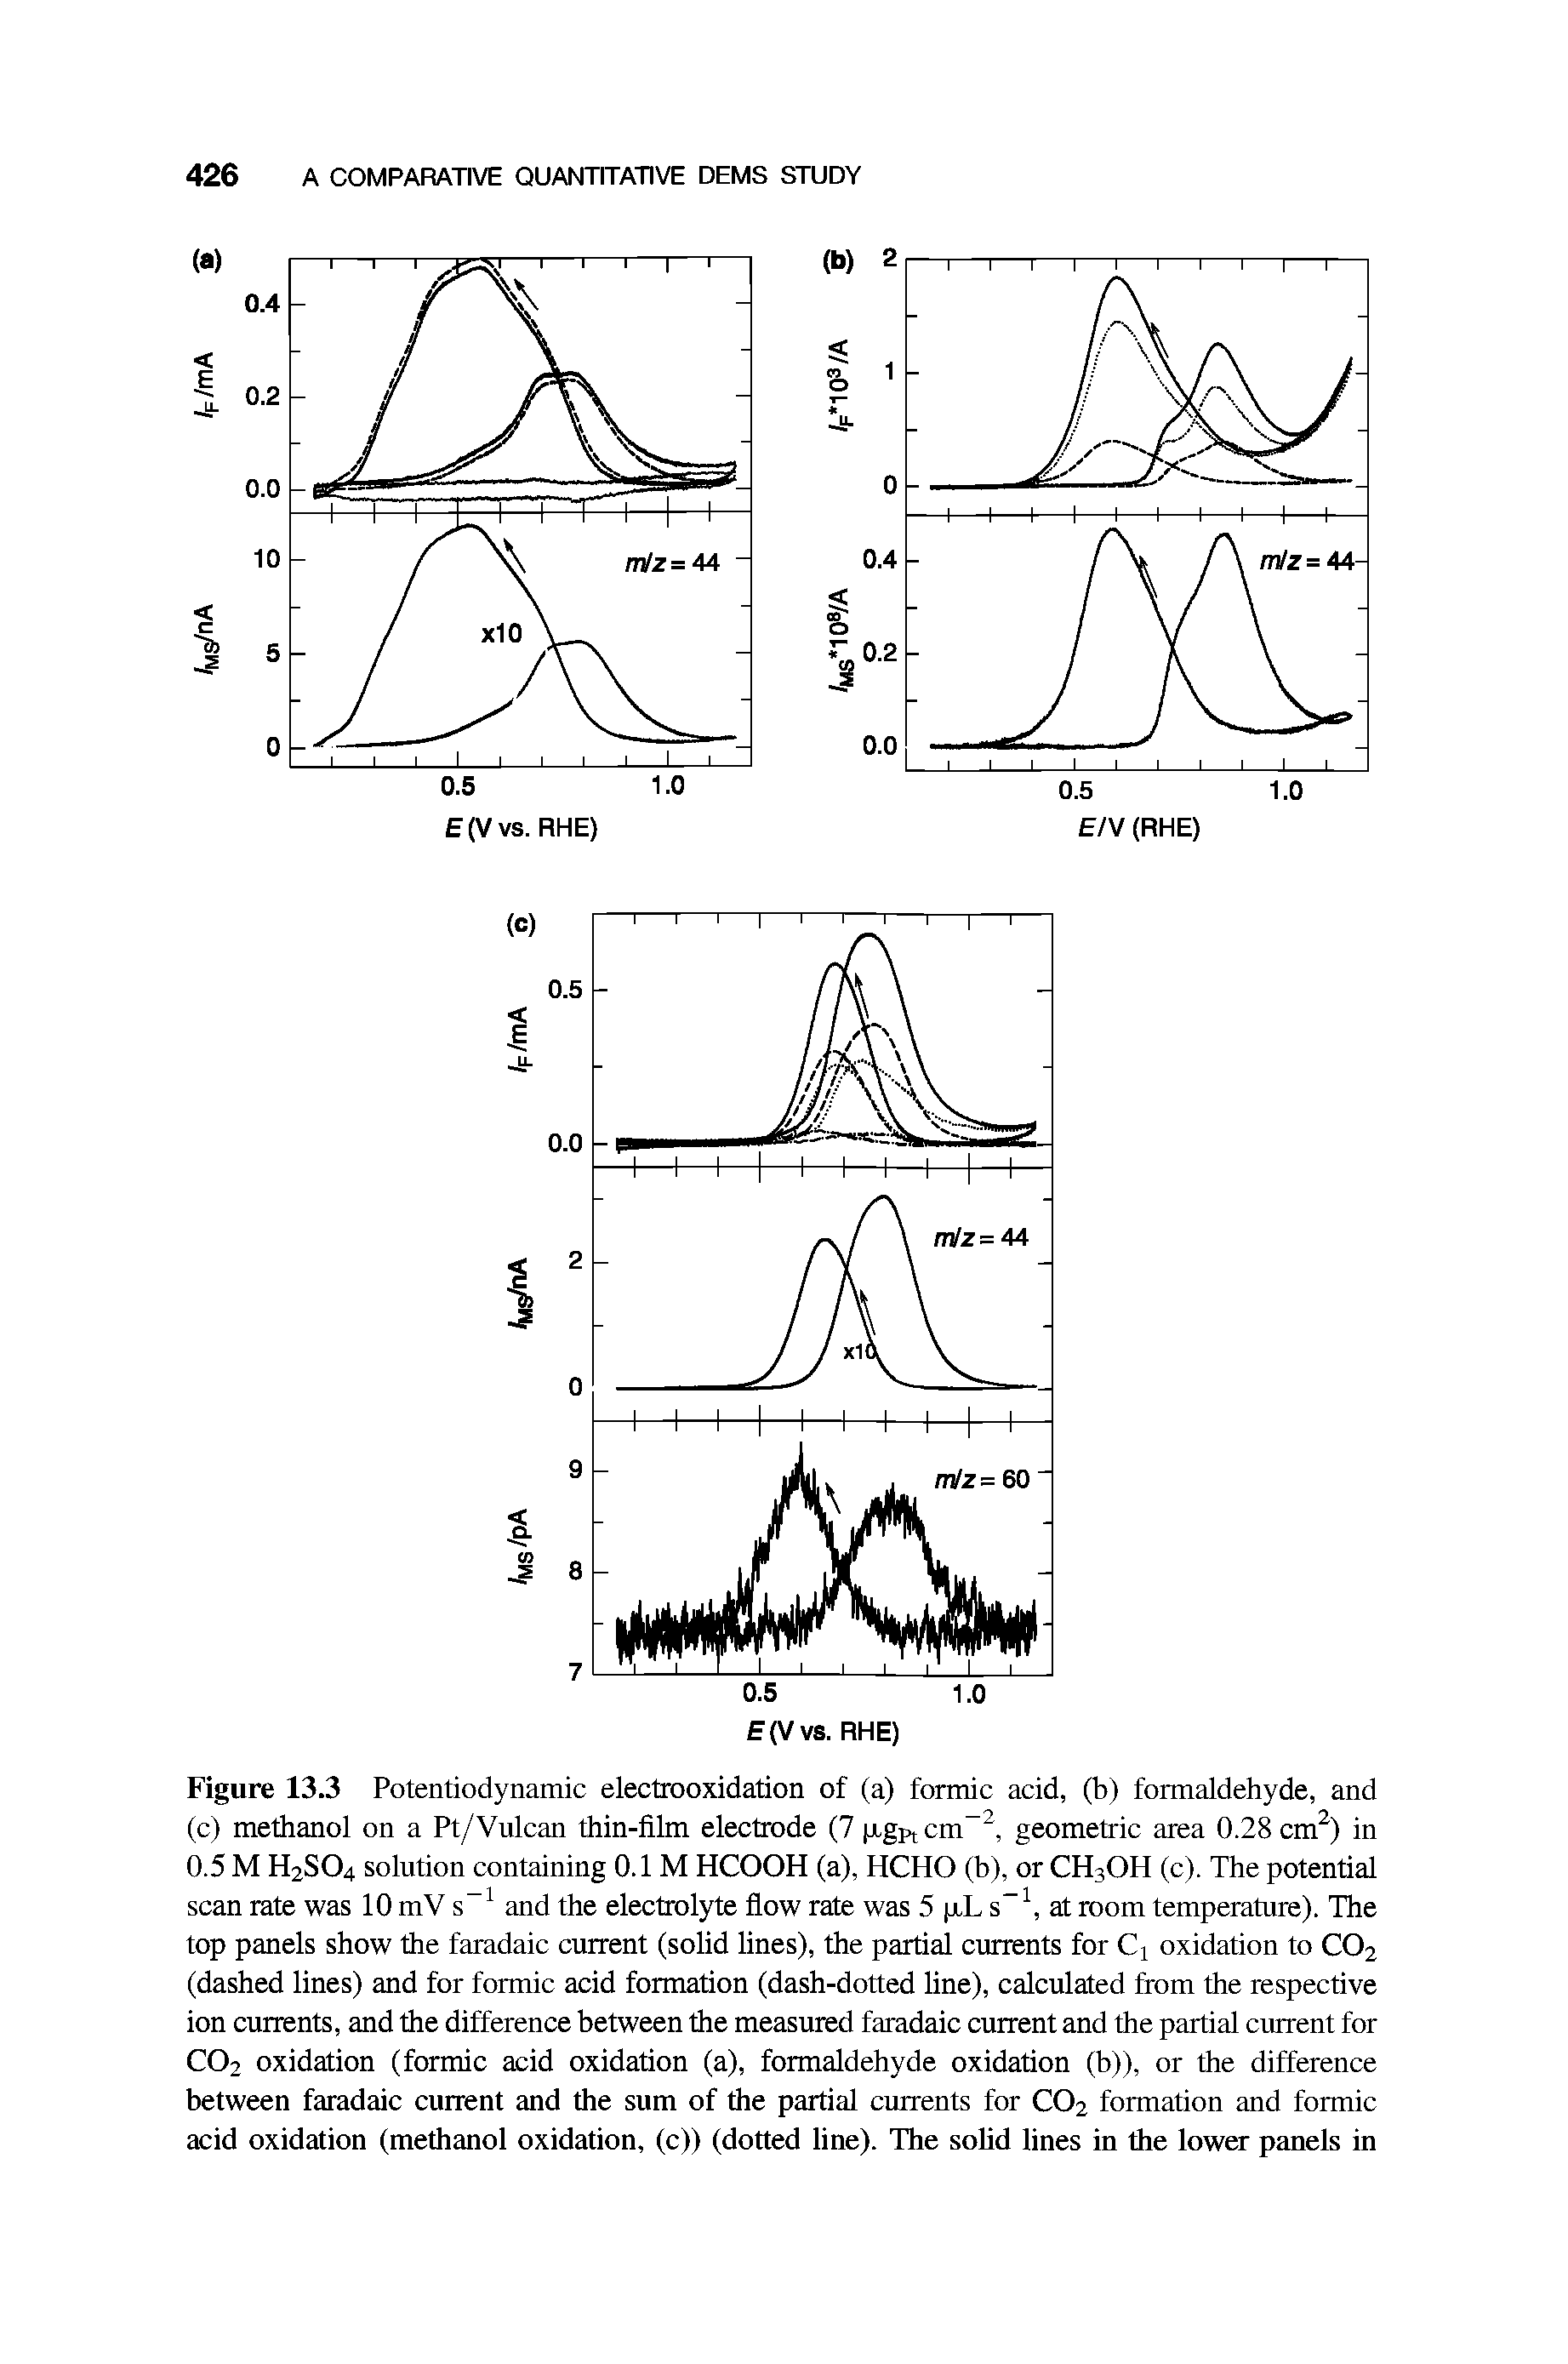 Figure 13.3 Potentiodynamic electrooxidation of (a) formic acid, (b) formaldehyde, and (c) methanol on a Pt/Vulcan thin-film electrode (7 xgpt cm, geometric area 0.28 cm ) in 0.5 M H2SO4 solution containing 0.1 M HCOOH (a), HCHO (b), or CH3OH (c). The potential scan rate was 10 mV s and the electrolyte flow rate was 5 p-L s at room temperature). The top panels show the faradaic current (solid lines), the partial currents for Ci oxidation to CO2 (dashed lines) and for formic acid formation (dash-dotted line), calculated from the respective ion currents, and the difference between the measured faradaic current and the partial current for CO2 oxidation (formic acid oxidation (a), formaldehyde oxidation (b)), or the difference between faradaic current and the sum of the partial currents for CO2 formation and formic acid oxidation (methanol oxidation, (c)) (dotted line). The solid lines in the lower panels in...